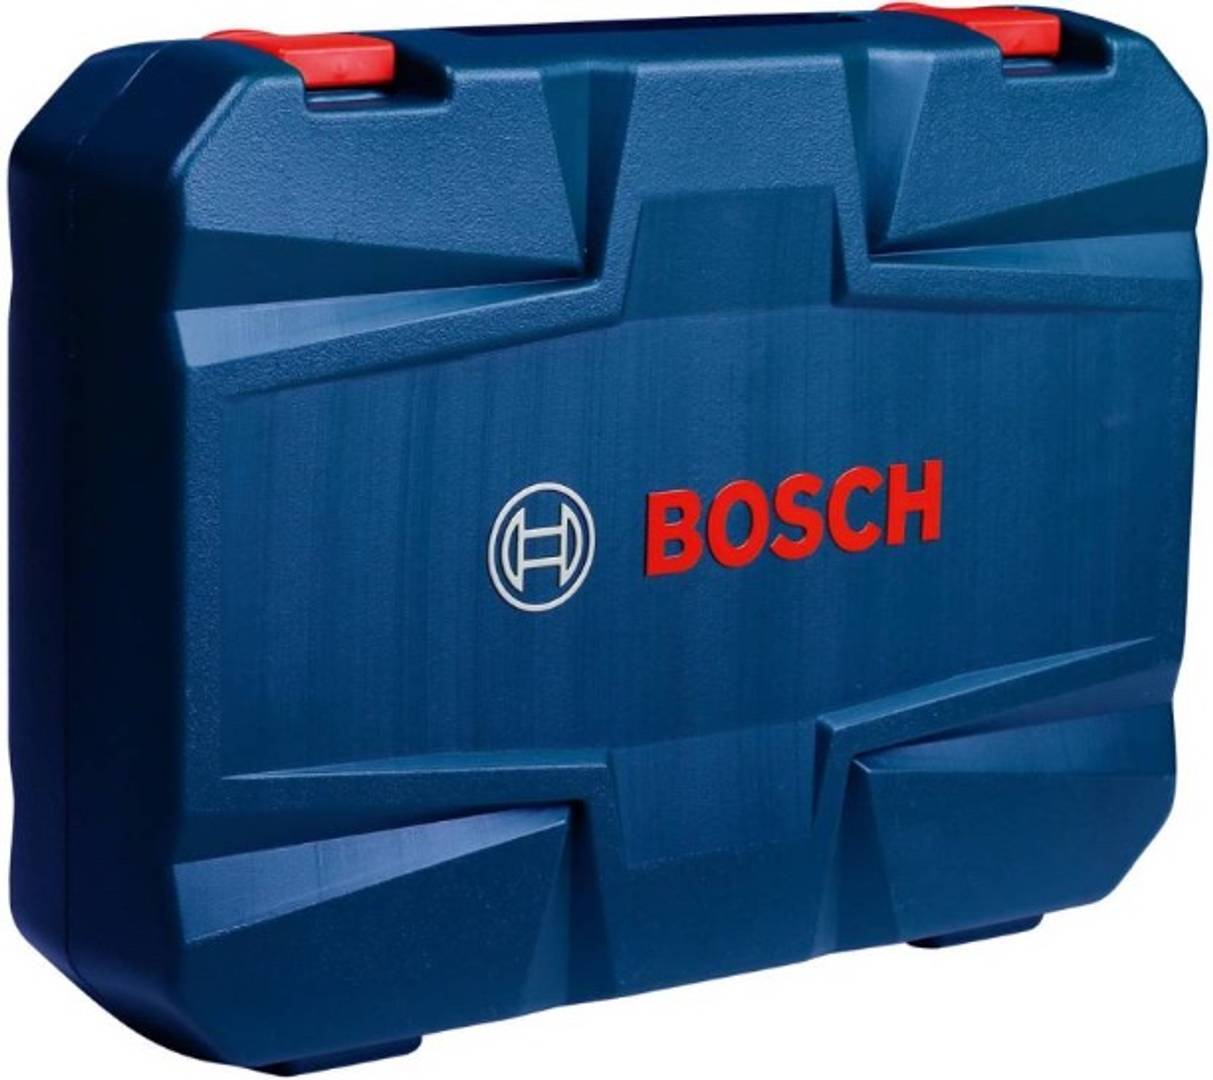 Bosch All-in-One Metal 108 Piece Hand Tool Kit  (108 Tools)